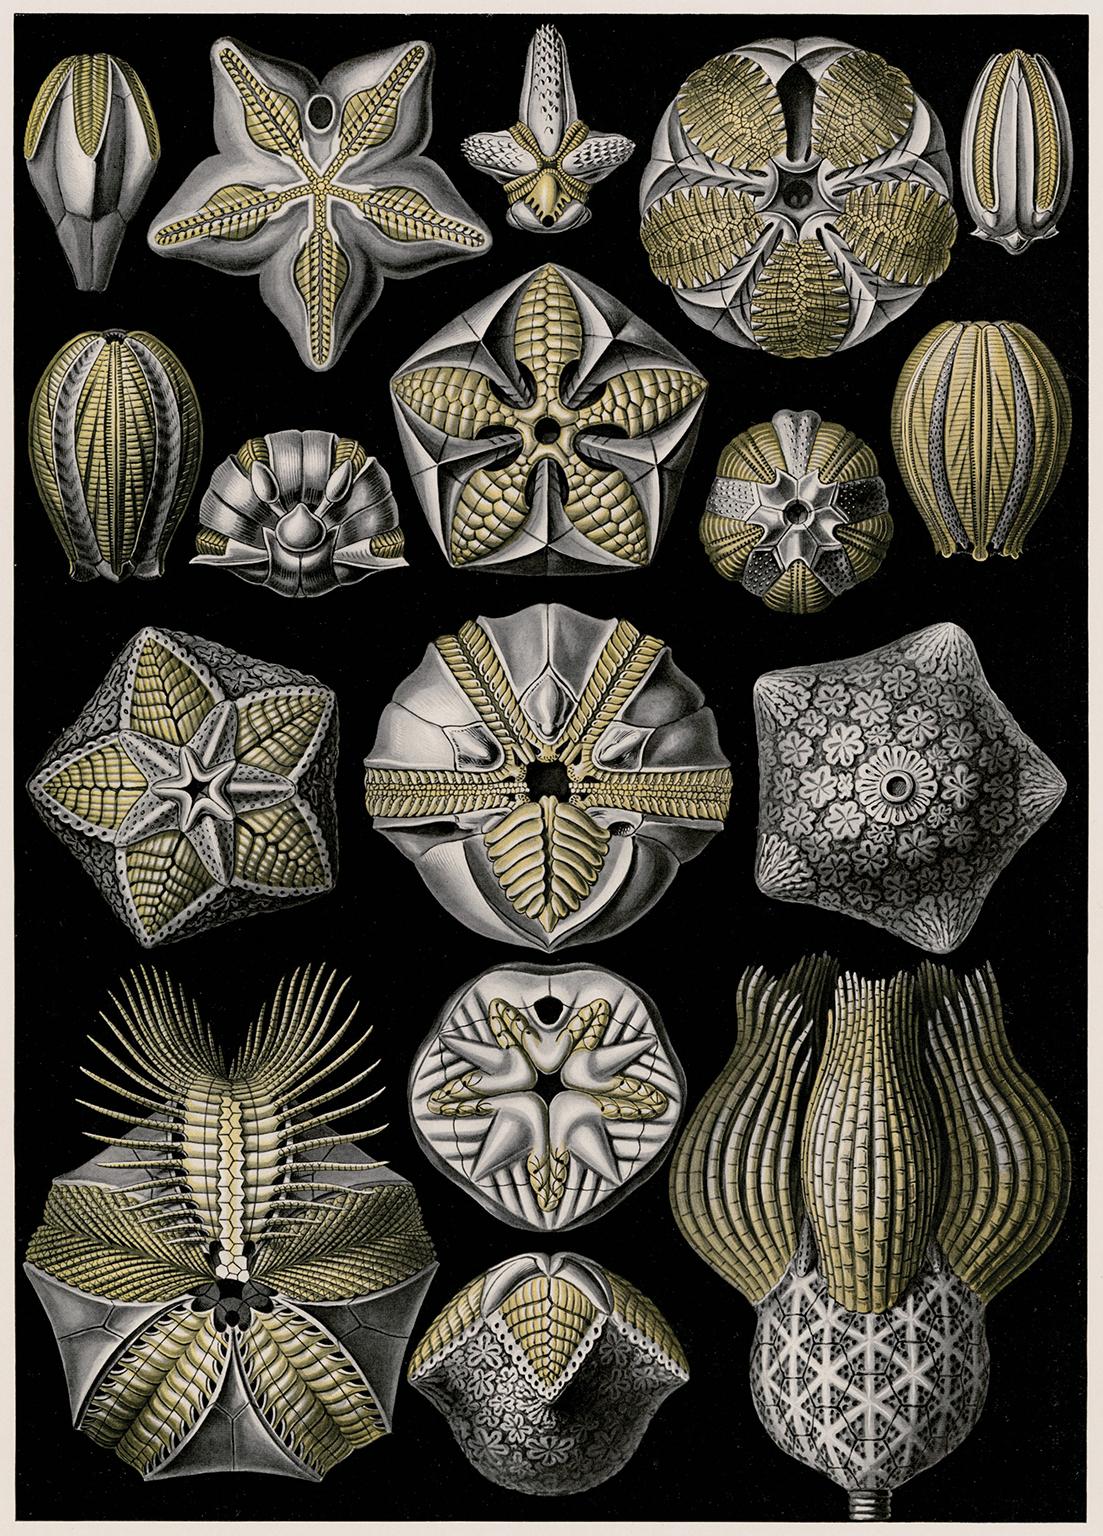 Ernst Haeckel Figurative Print - Art Forms in Nature (Plate 80 - Pentremites) — 1899 Celebration of Natural Forms